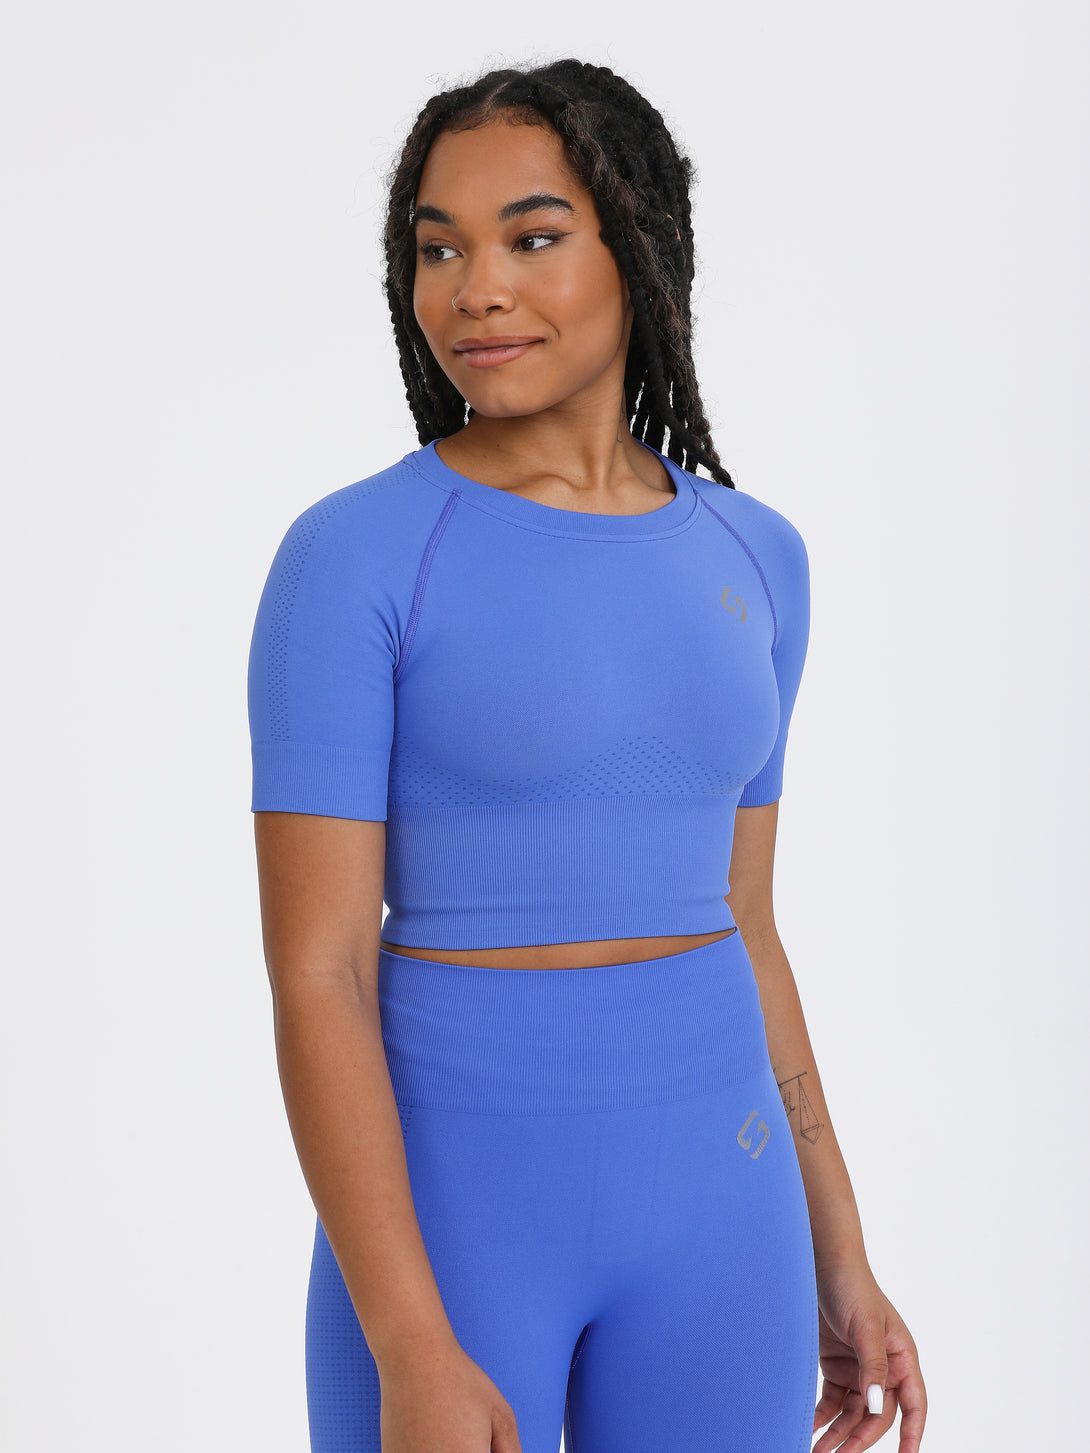 A Woman Wearing Amparo Blue Color The Main Short Sleeve Crop Top